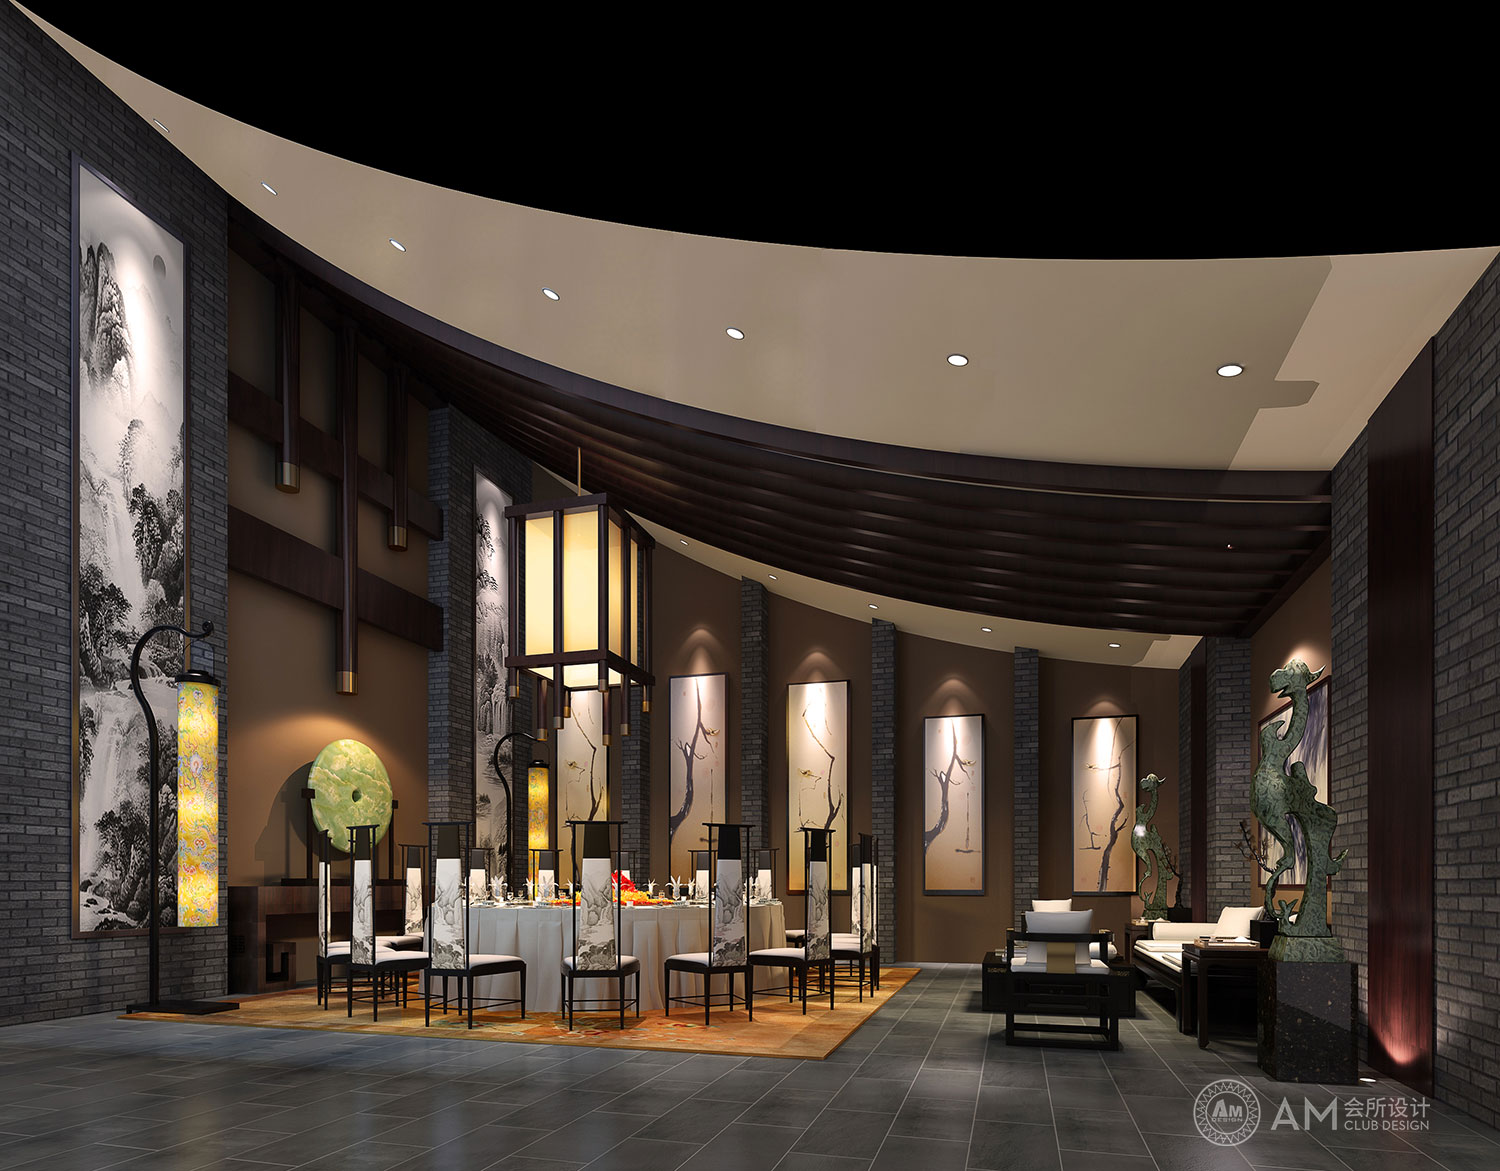 AM DESIGN | Design of chess and card room in qilinhui Top Spa Club